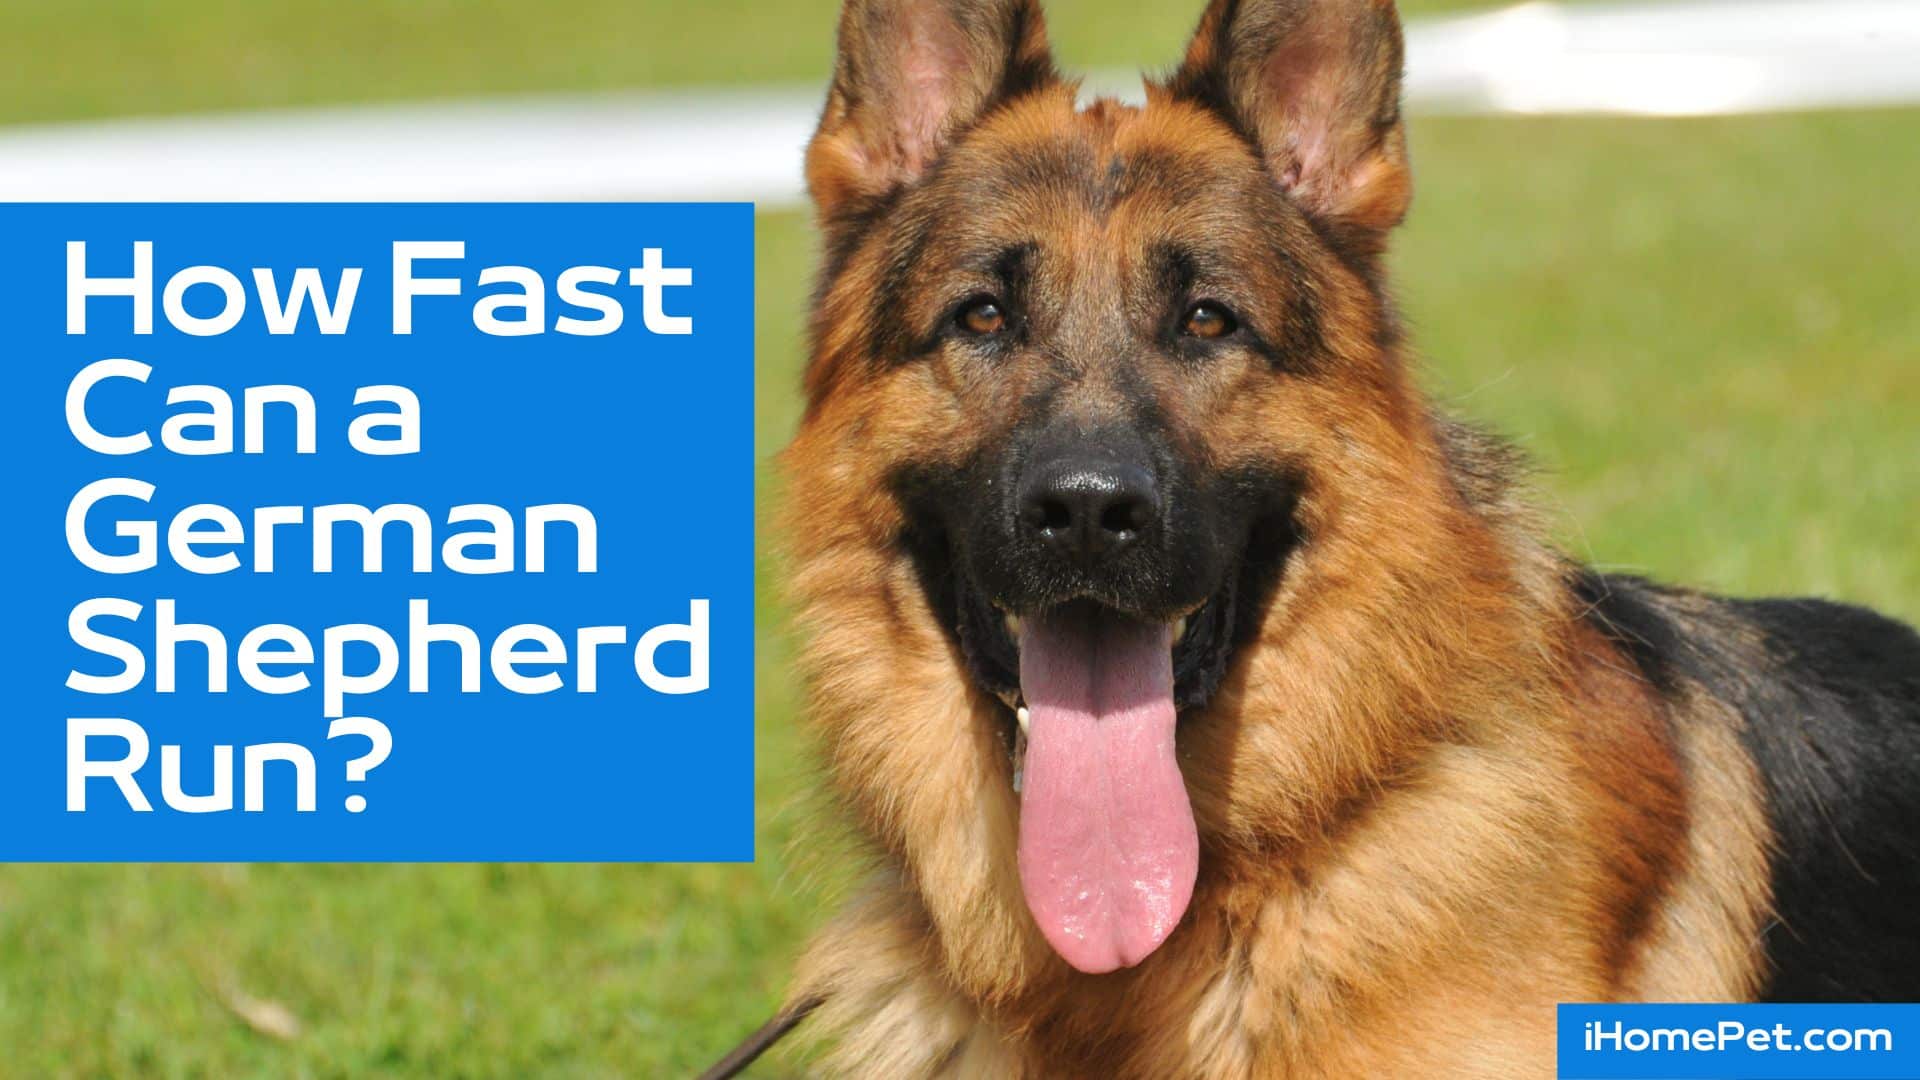 German sheperd was originally bred for working roles